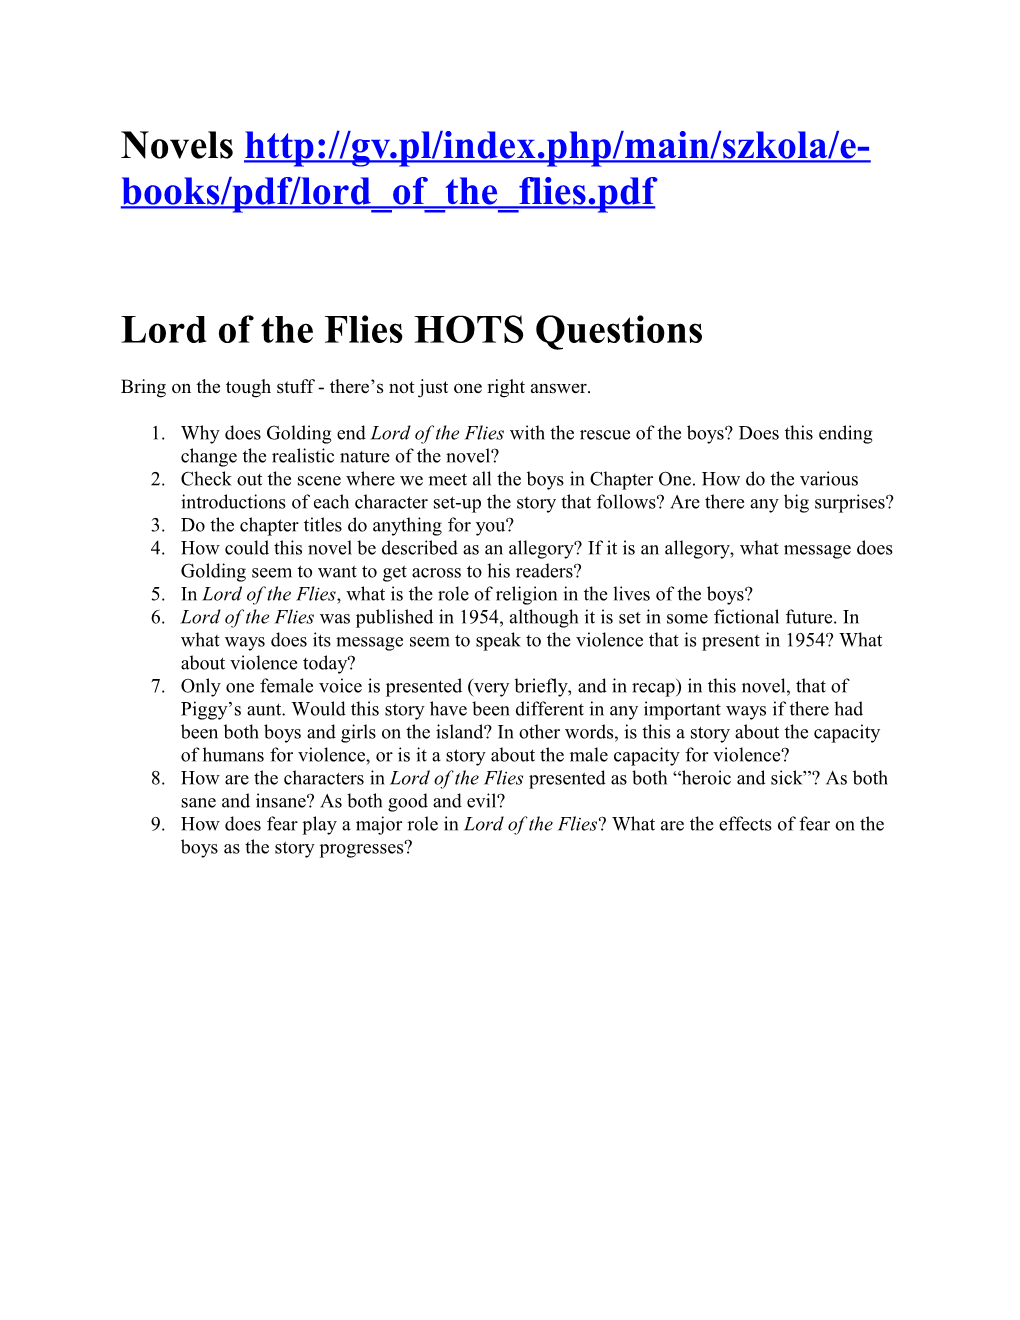 Lord of the Flies HOTS Questions